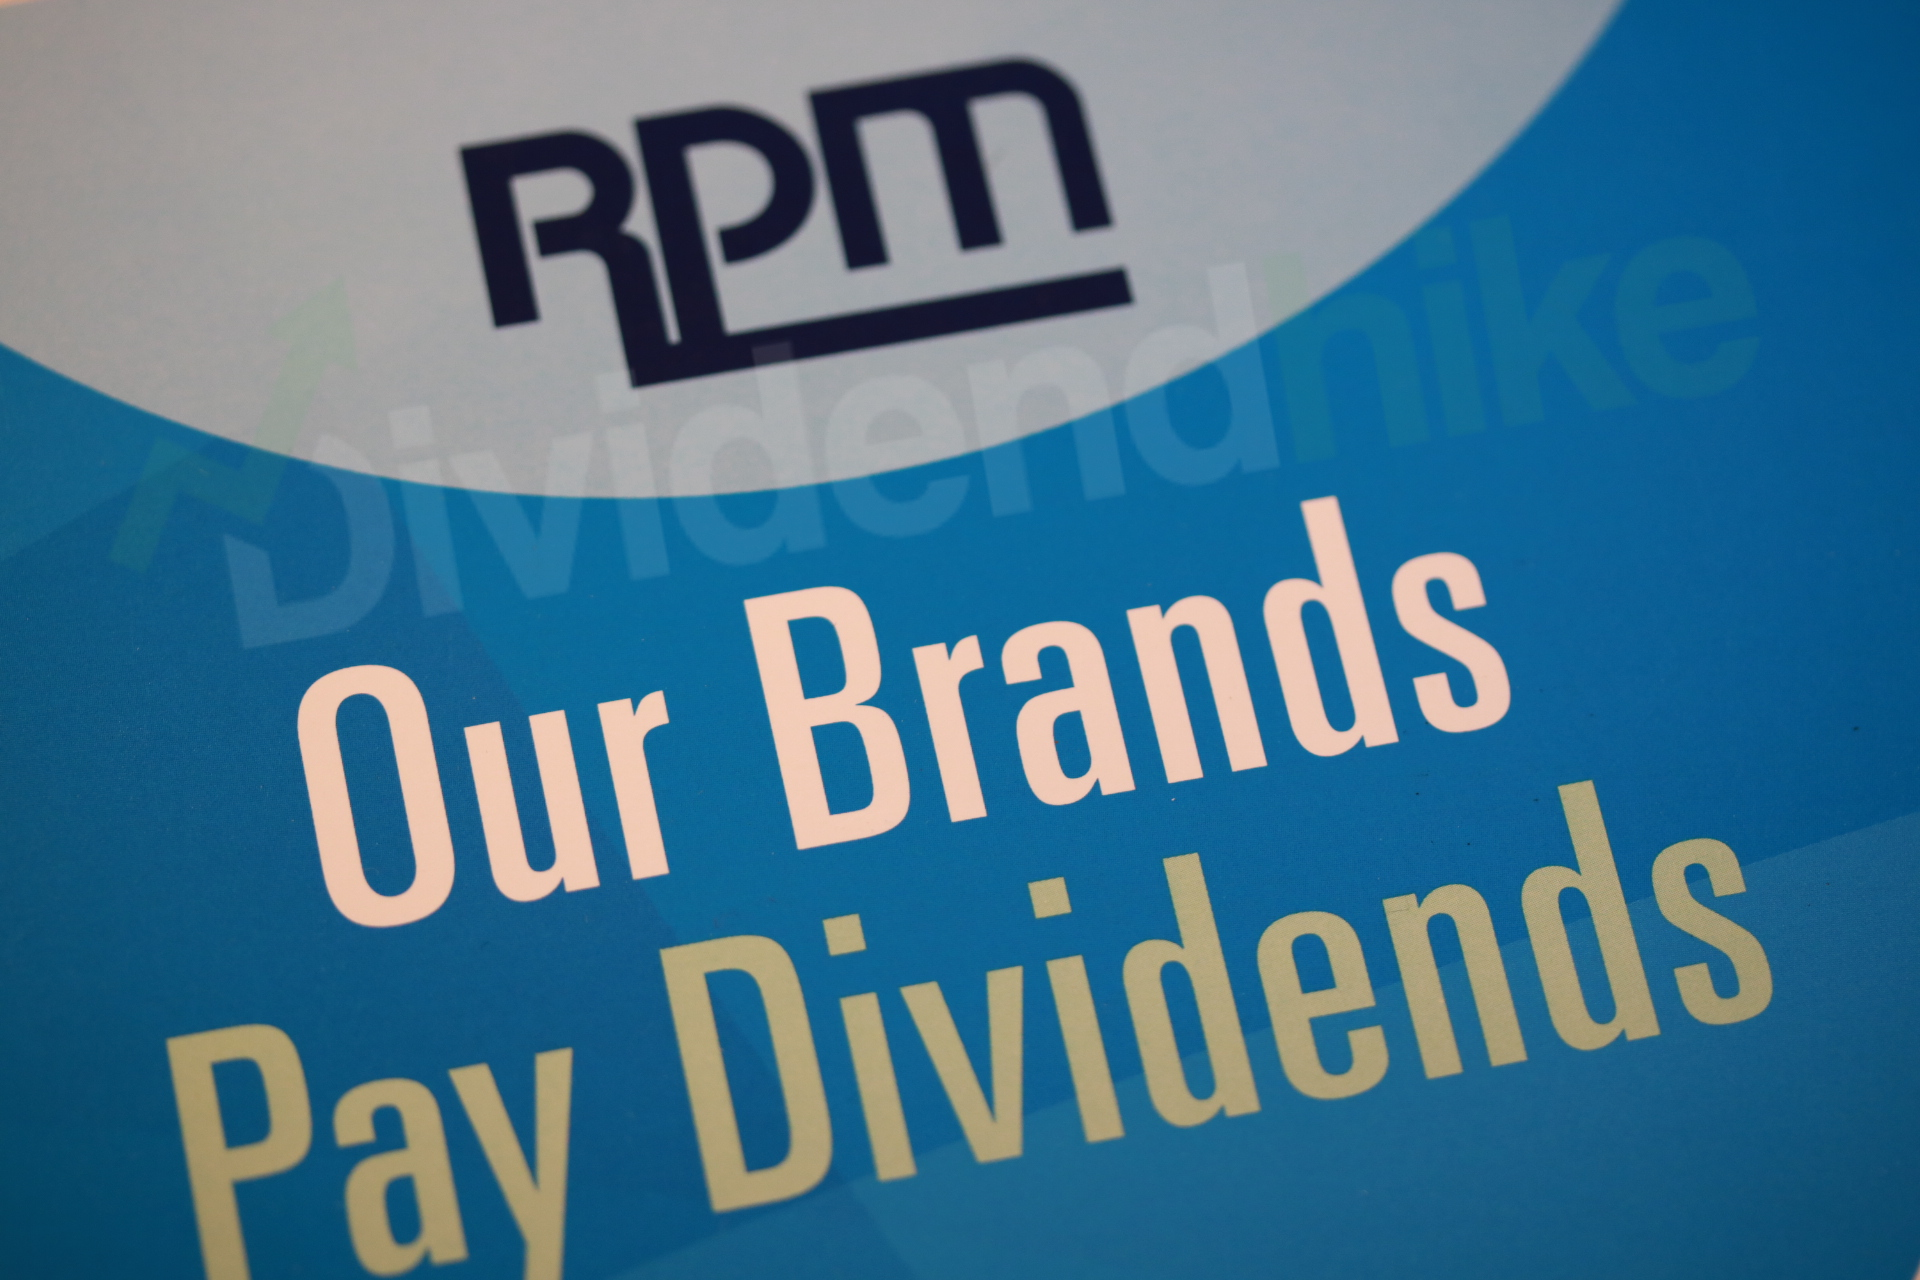 RPM owns many brands paying for the dividend © dividendhike